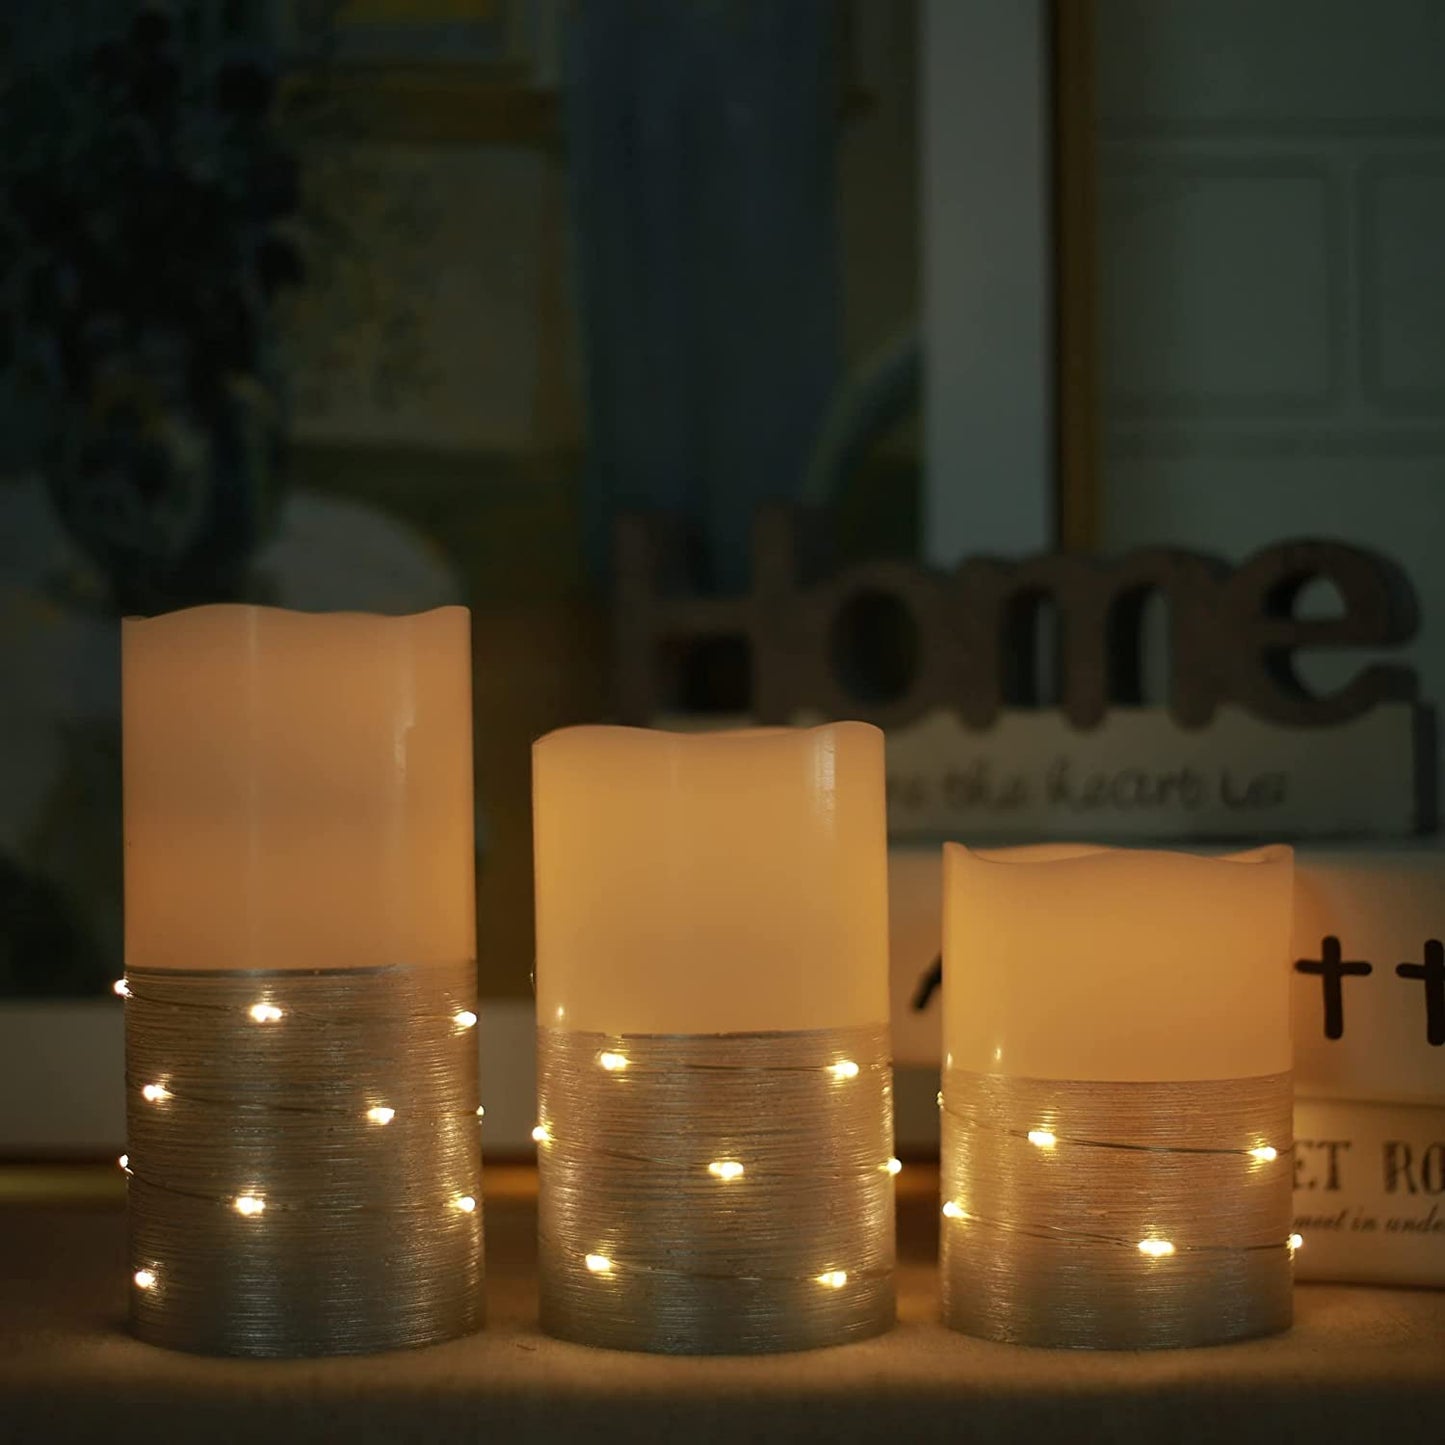 Flickering Flameless Candles Ivory Real Wax Pillar with Embedded String Lights H-BLOSSOM LED Candles Battery Operated with Cycling 5H Timer Set of 3 (3" x 4"/5"/6") (Ivory)